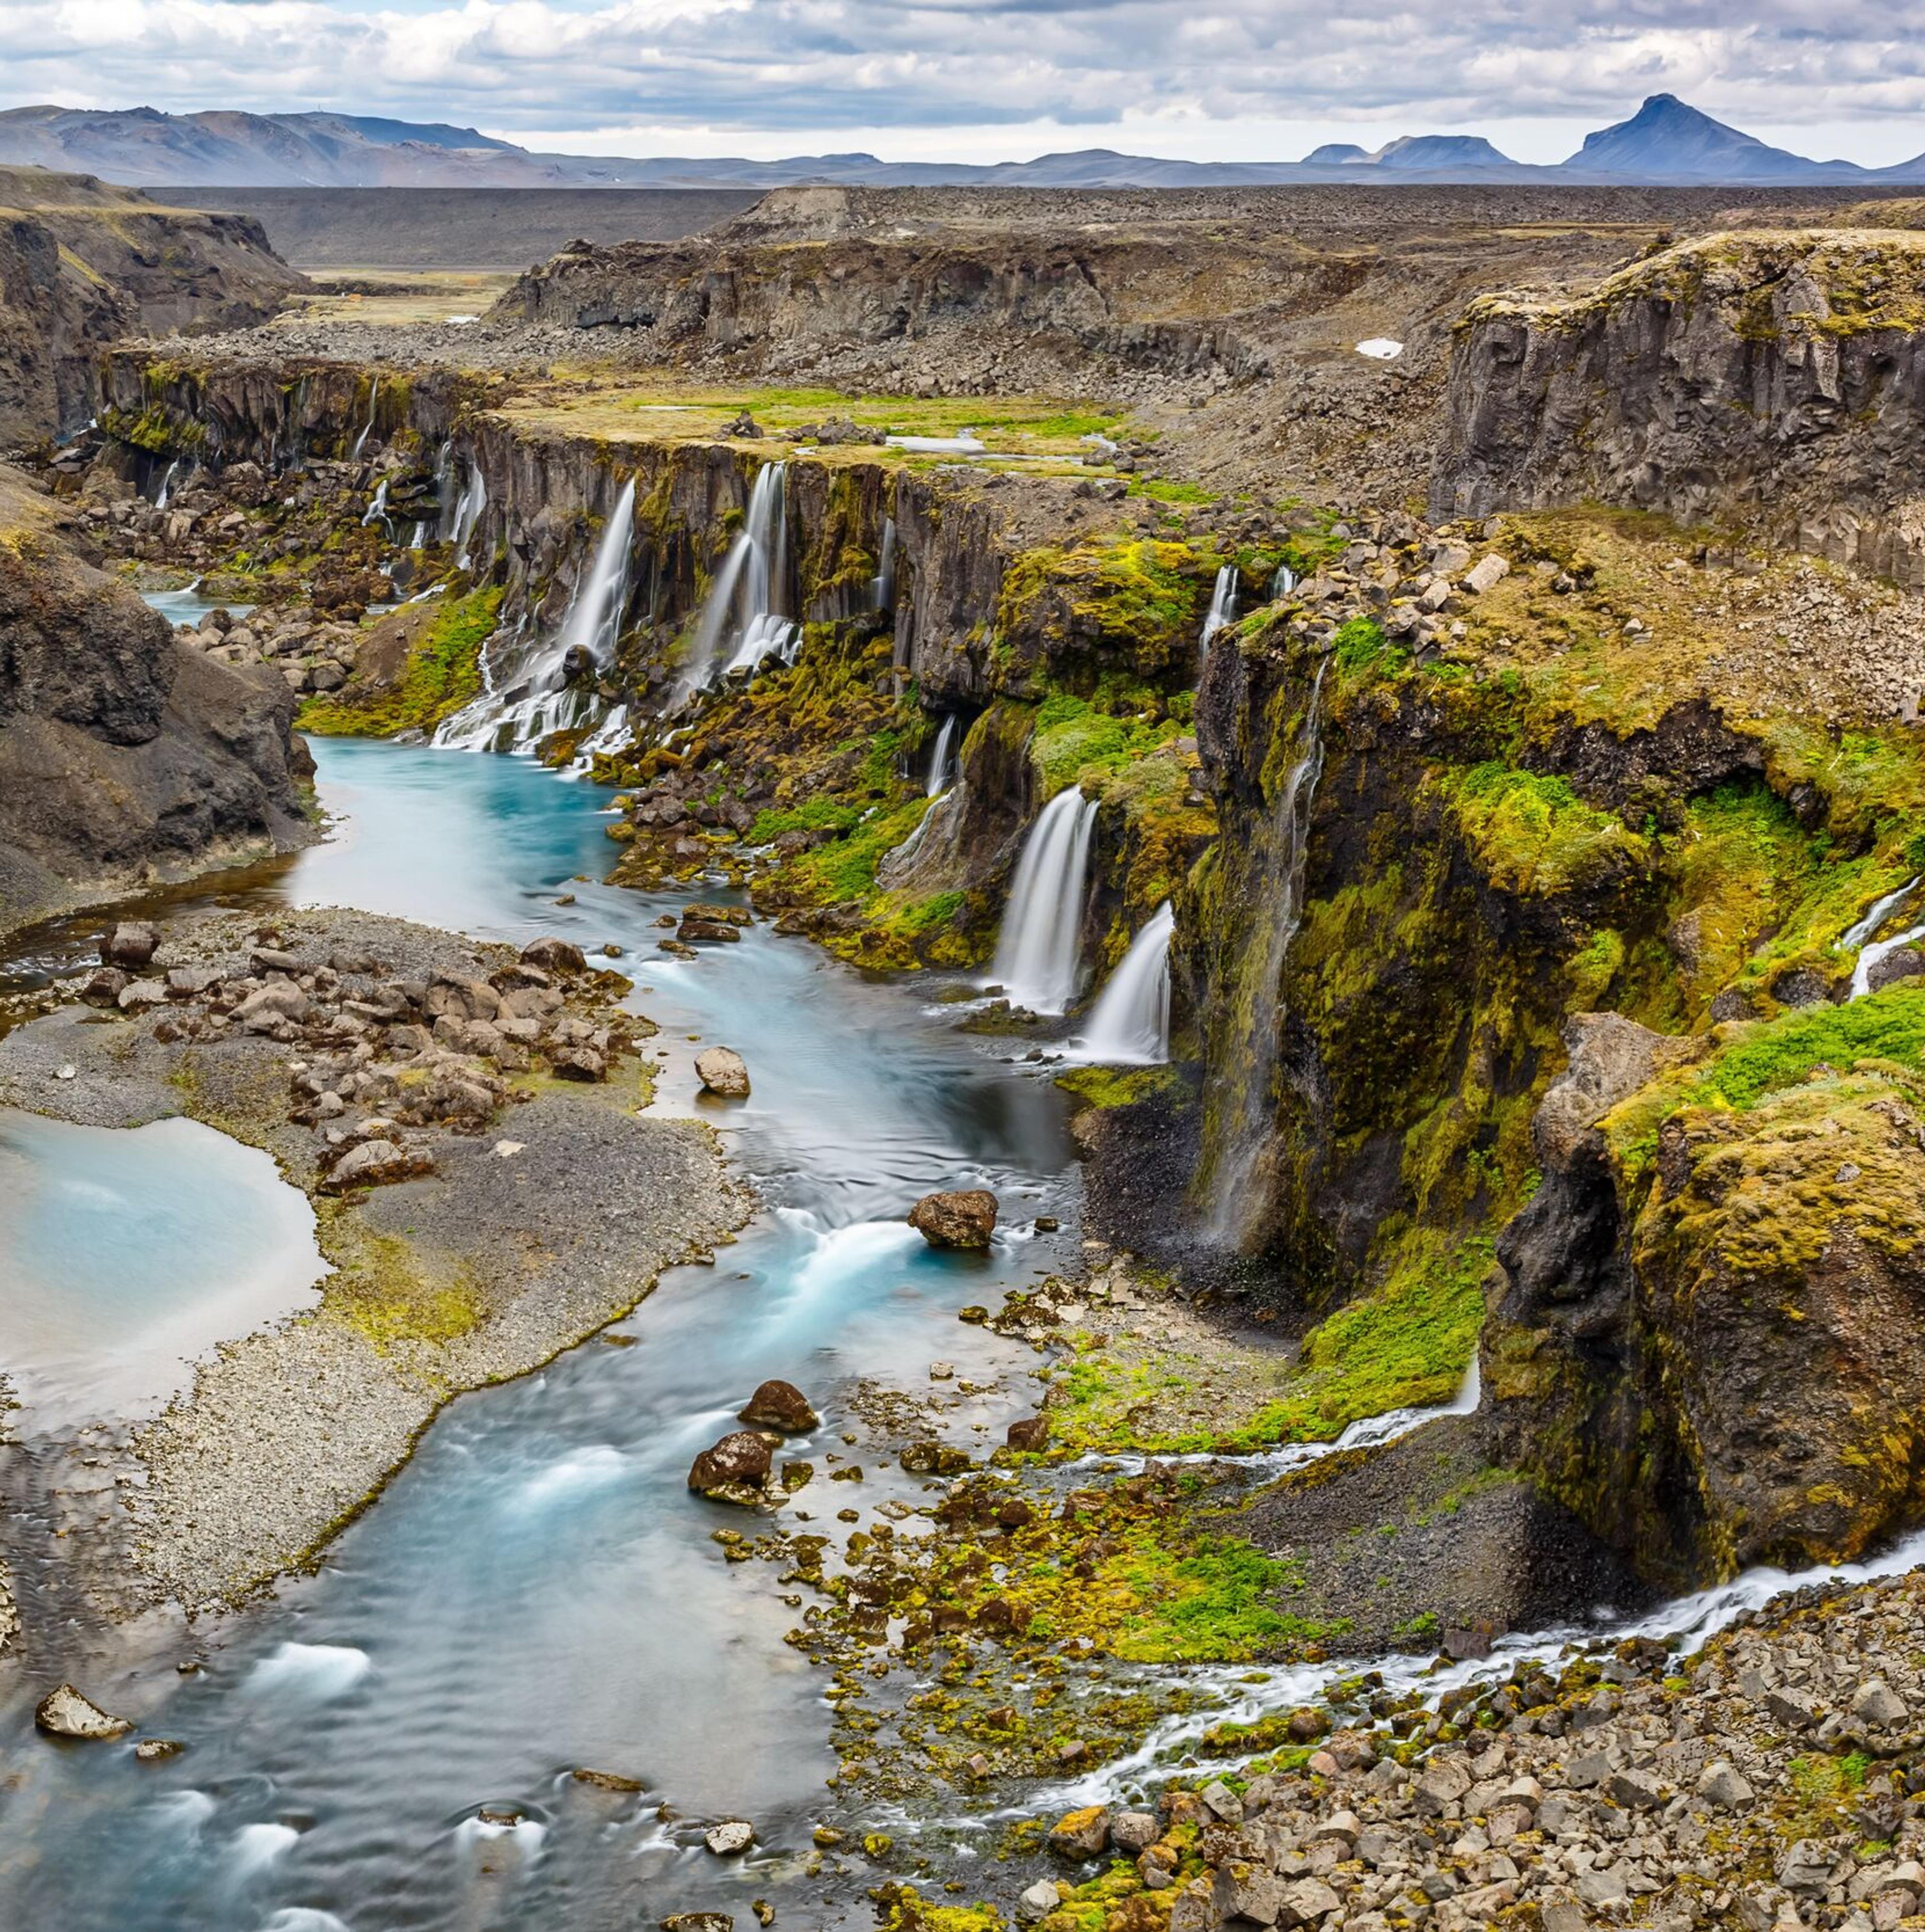 Overview of Sigöldugljúfur canyon in Iceland, featuring a winding river flanked by steep, moss-covered cliffs with numerous small waterfalls feeding into turquoise blue pools, set against a barren, volcanic landscape